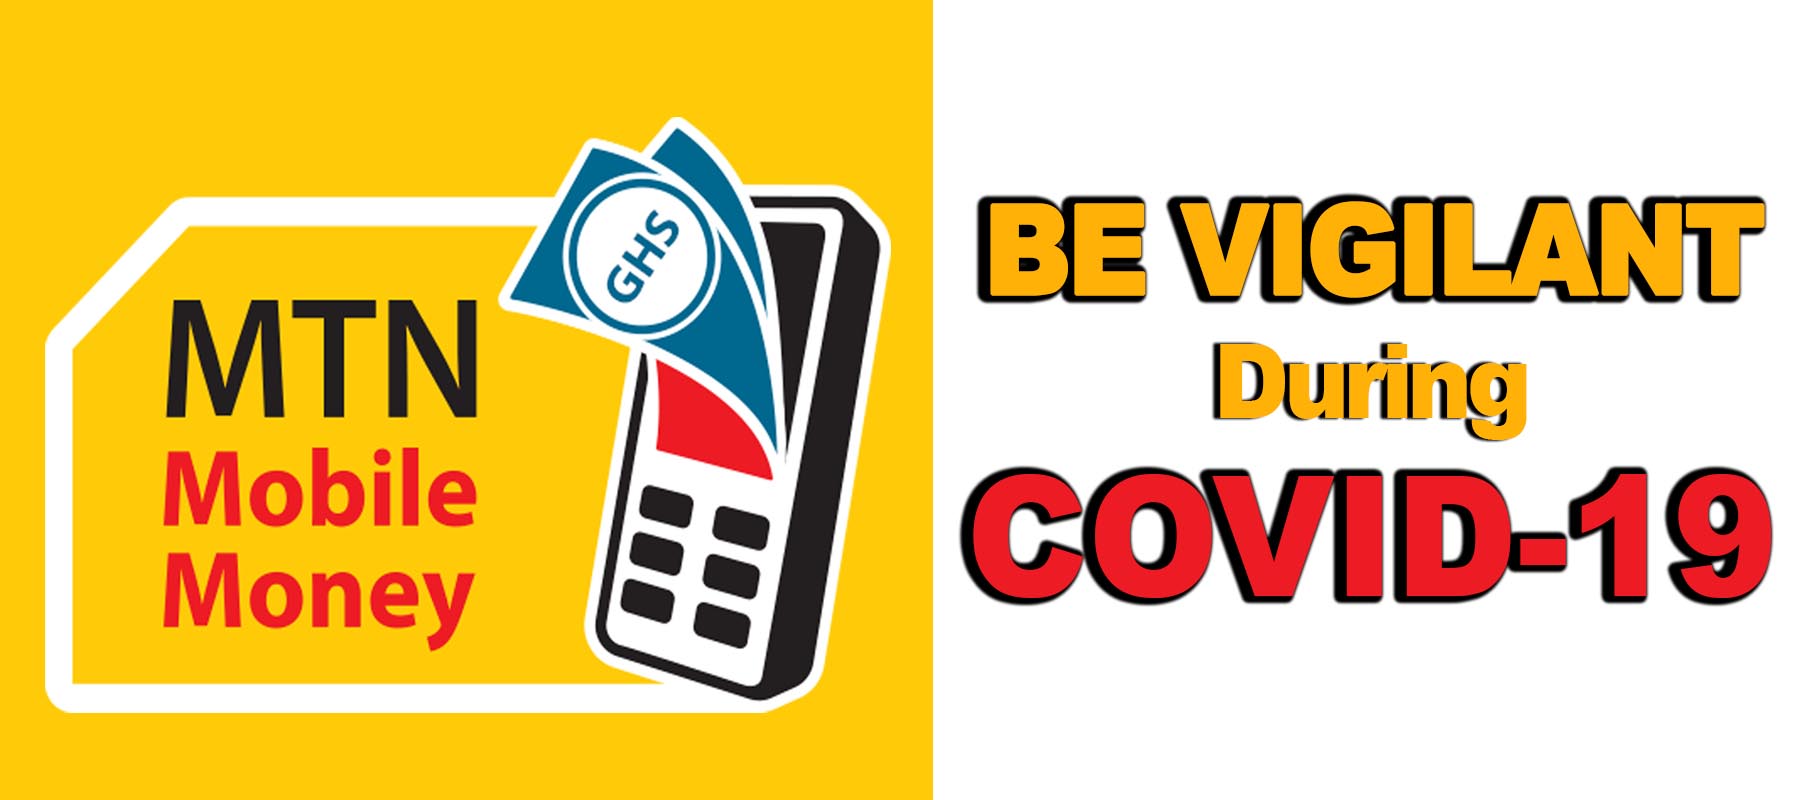 You are currently viewing Mobile Money MTN Says Be Vigilant During COVID-19